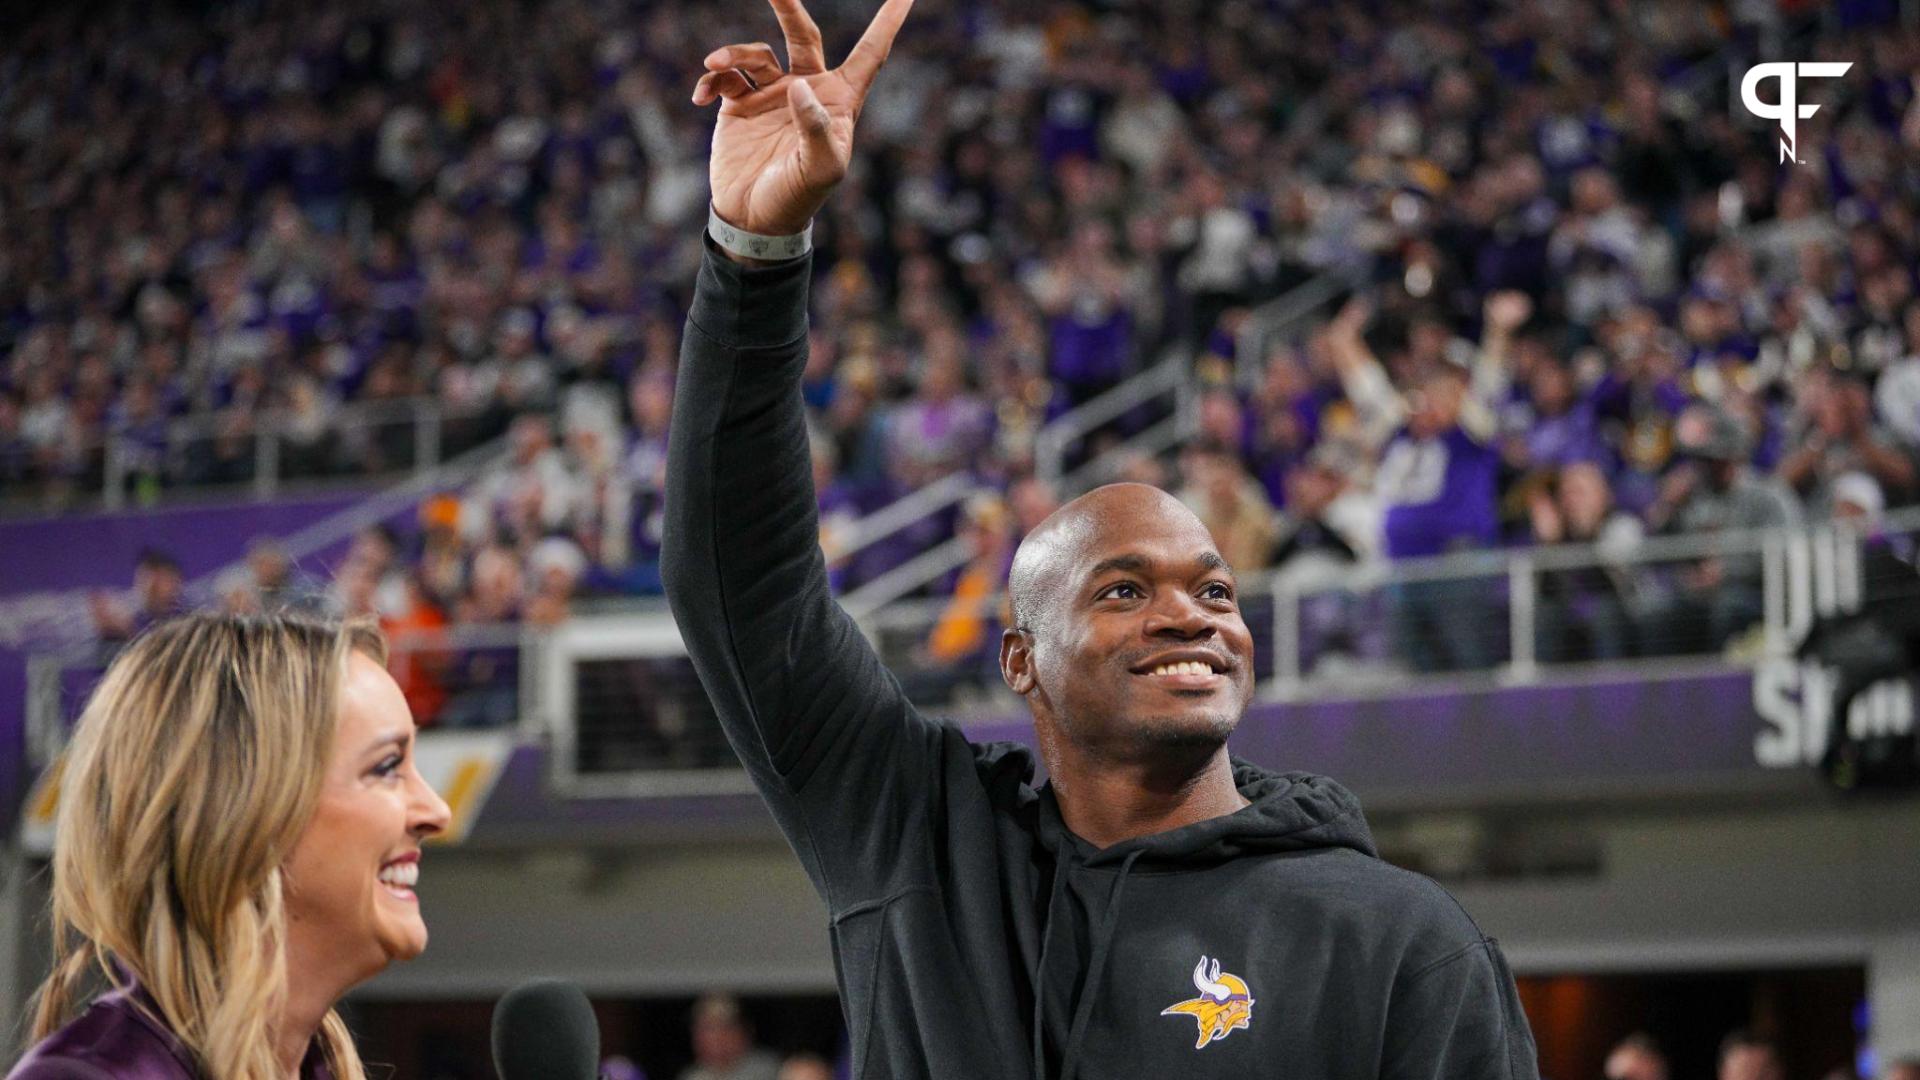 adrian peterson says unlawful actions lead to unauthorized estate sale